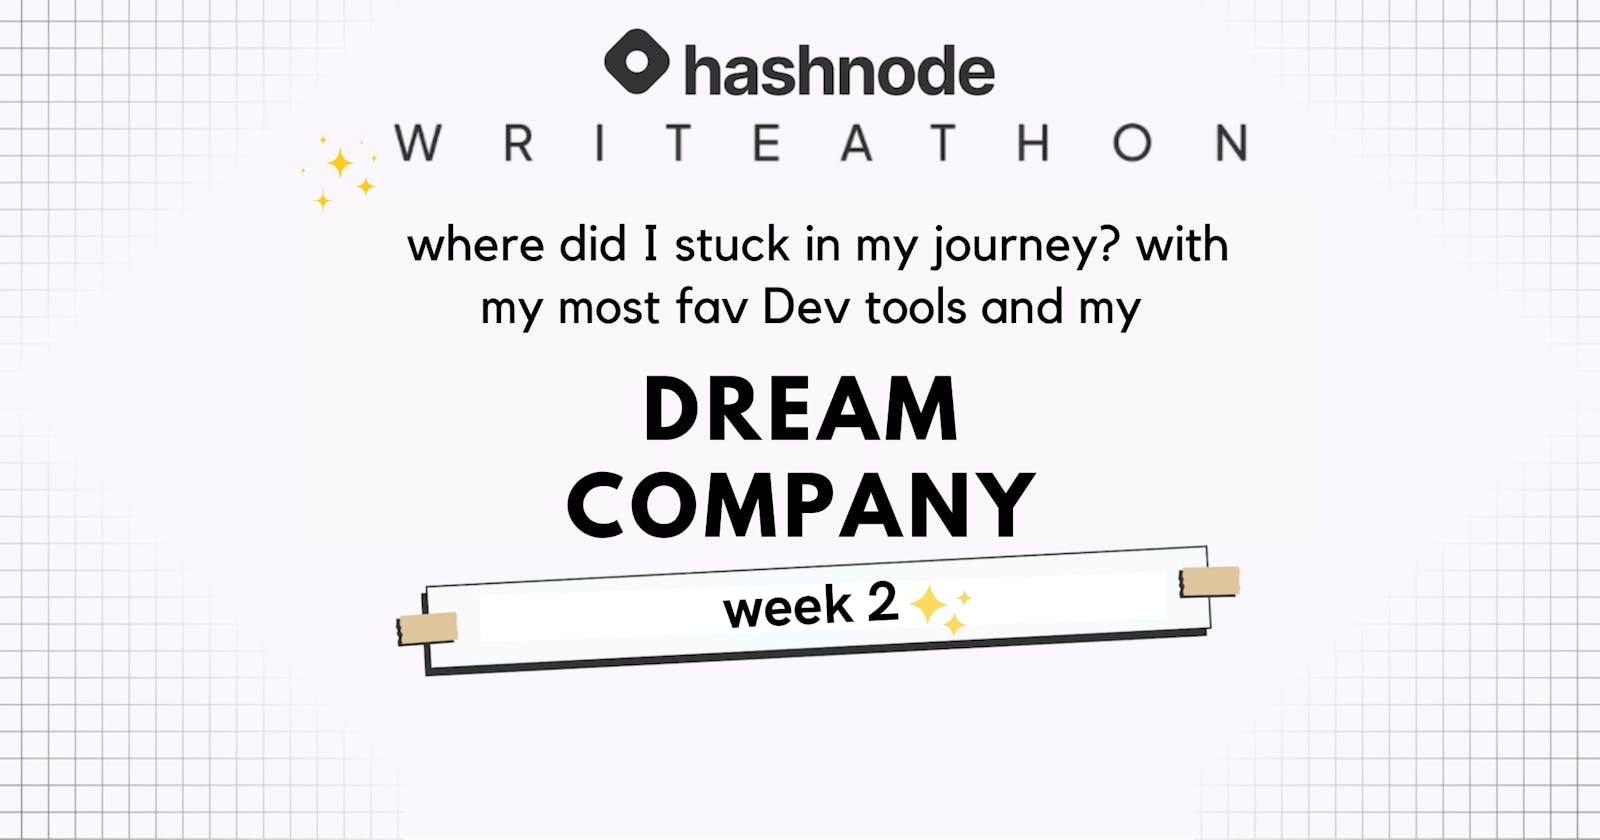 My Dream Company and where I stuck in my journey? with my most fav Dev tools.